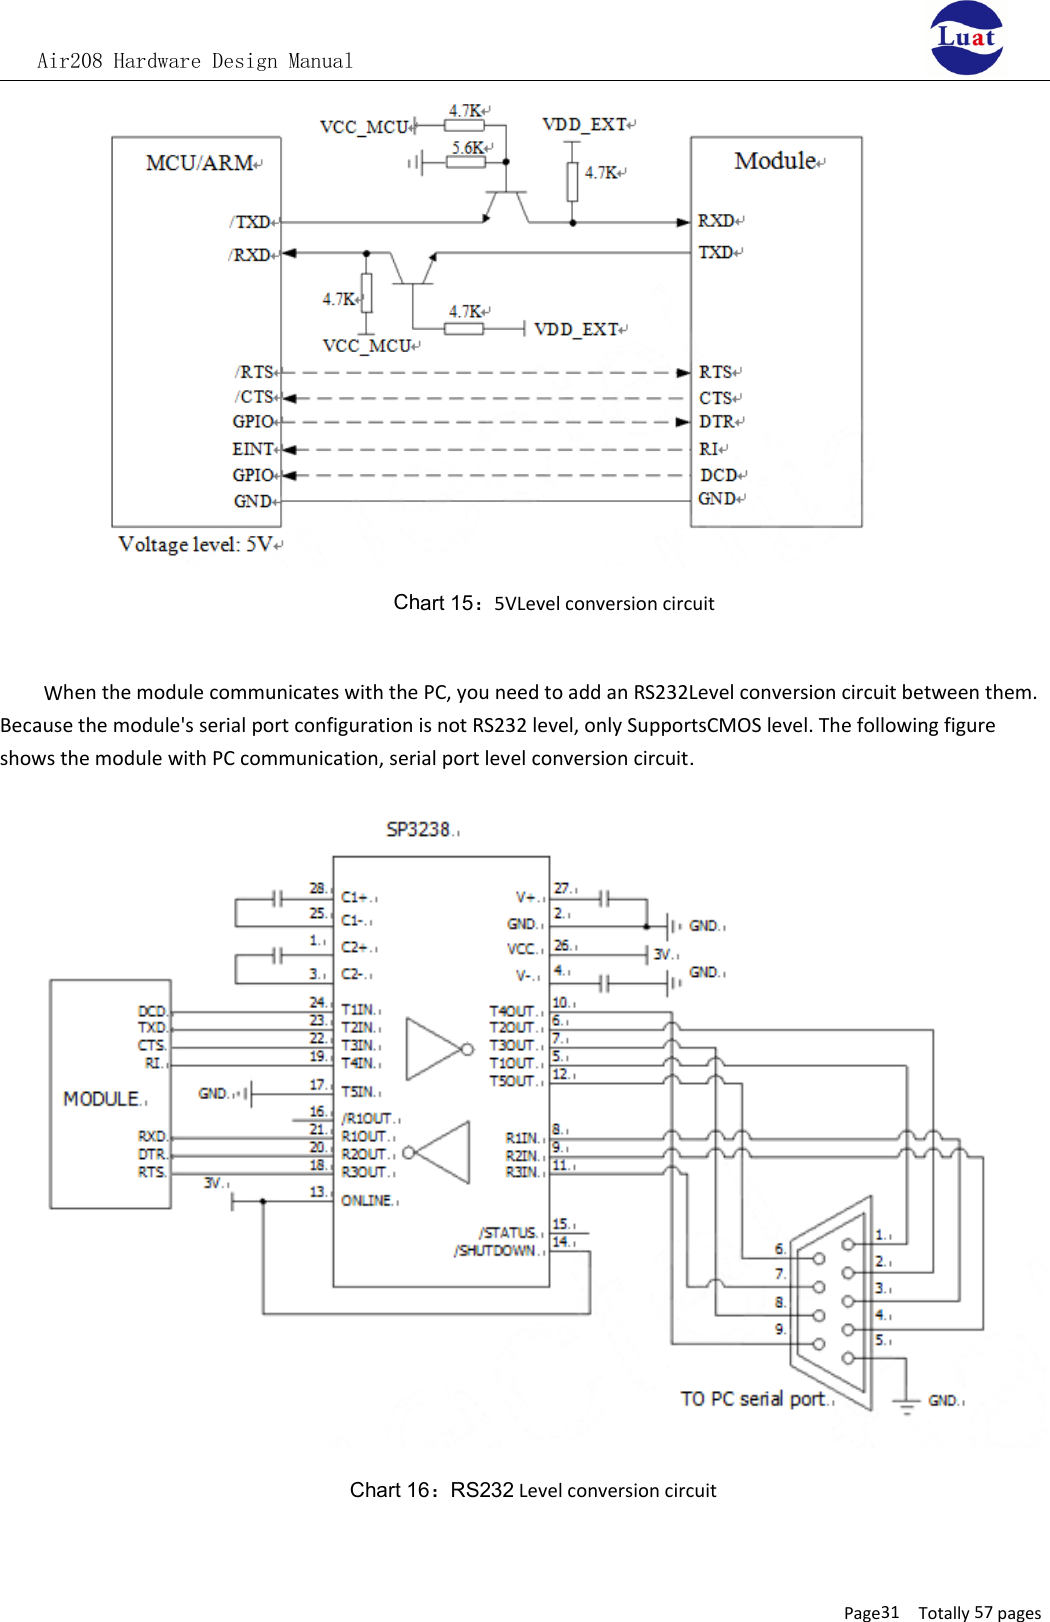 Air208 Hardware Design ManualPage31 Totally 57 pagesChart 15：5VLevel conversion circuitWhen the module communicates with the PC, you need to add an RS232Level conversion circuit between them.Because the module&apos;s serial port configuration is not RS232 level, only SupportsCMOS level. The following figureshows the module with PC communication, serial port level conversion circuit.Chart 16：RS232 Level conversion circuit